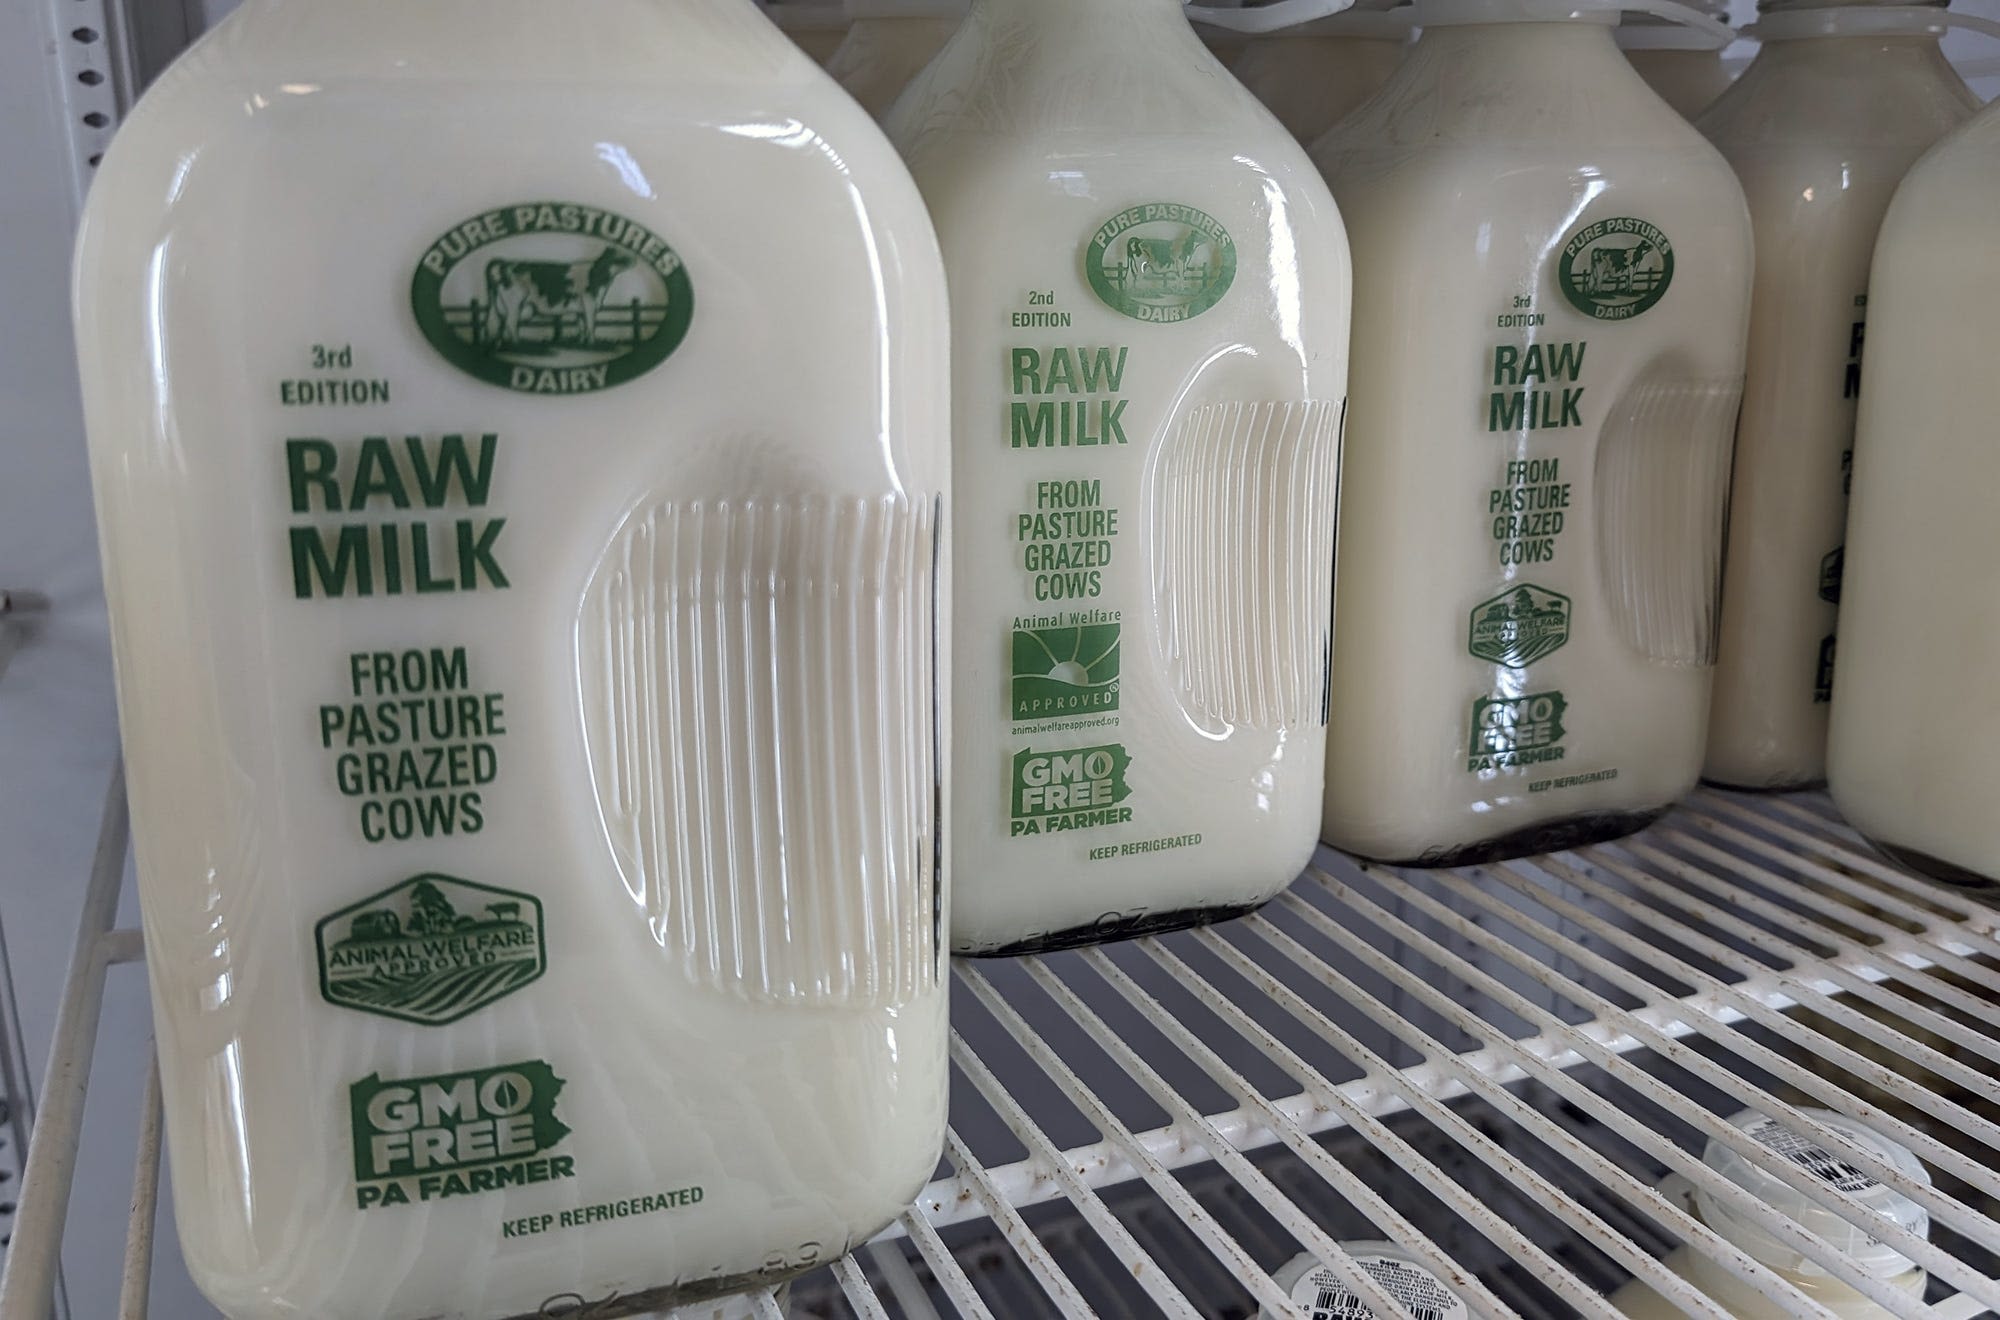 Check your refrigerator. Raw milk contaminated with harmful bacteria: PA Department of Ag